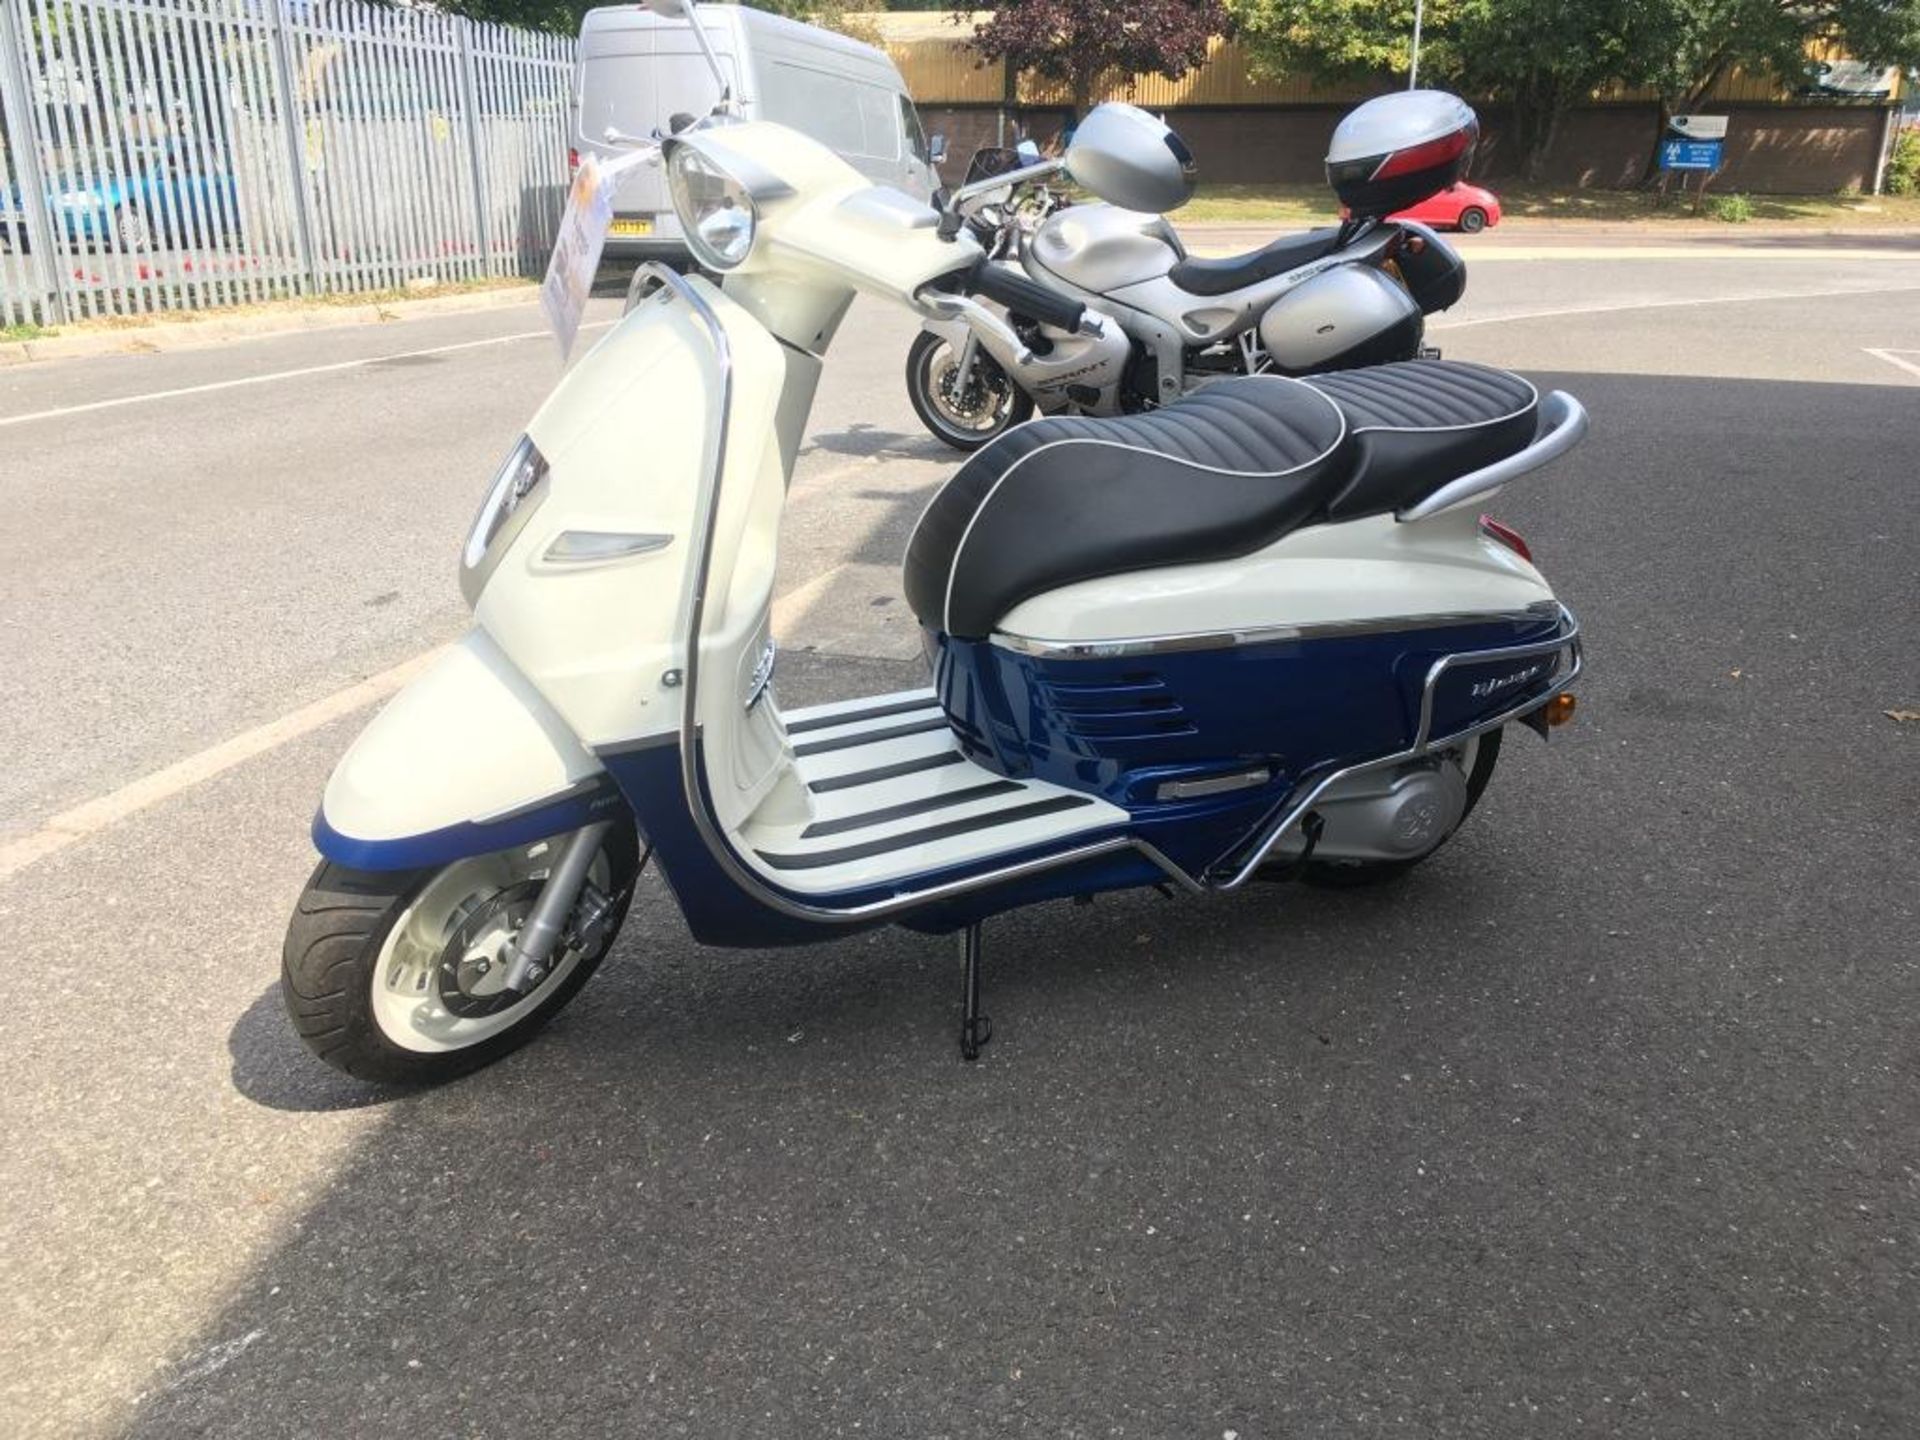 Peugeot Django 125 Evasion ABS moped, Unregistered and no certificate of conformity held, VIN: - Image 8 of 16